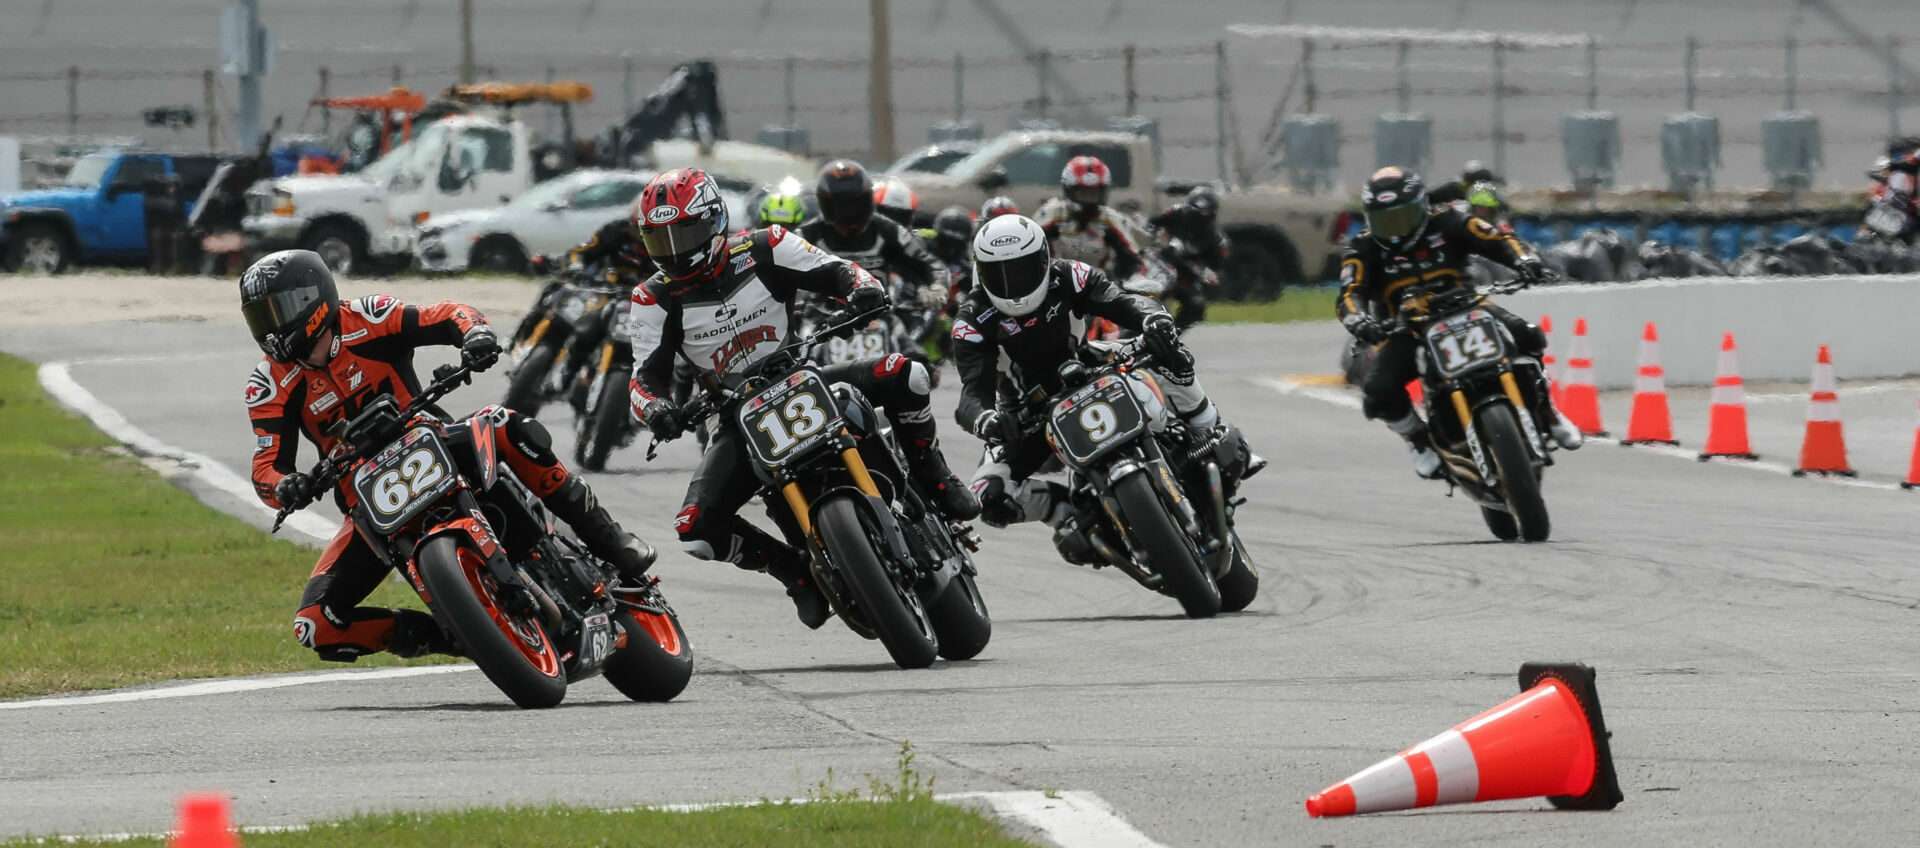 The start of RSD Super Hooligan Race One at Daytona with Andy DiBrino (62) leading Cory West (13), Nate Kern (9), Frankie Garcia (14), and the rest of the field through the infield. Photo by Brian J. Nelson.